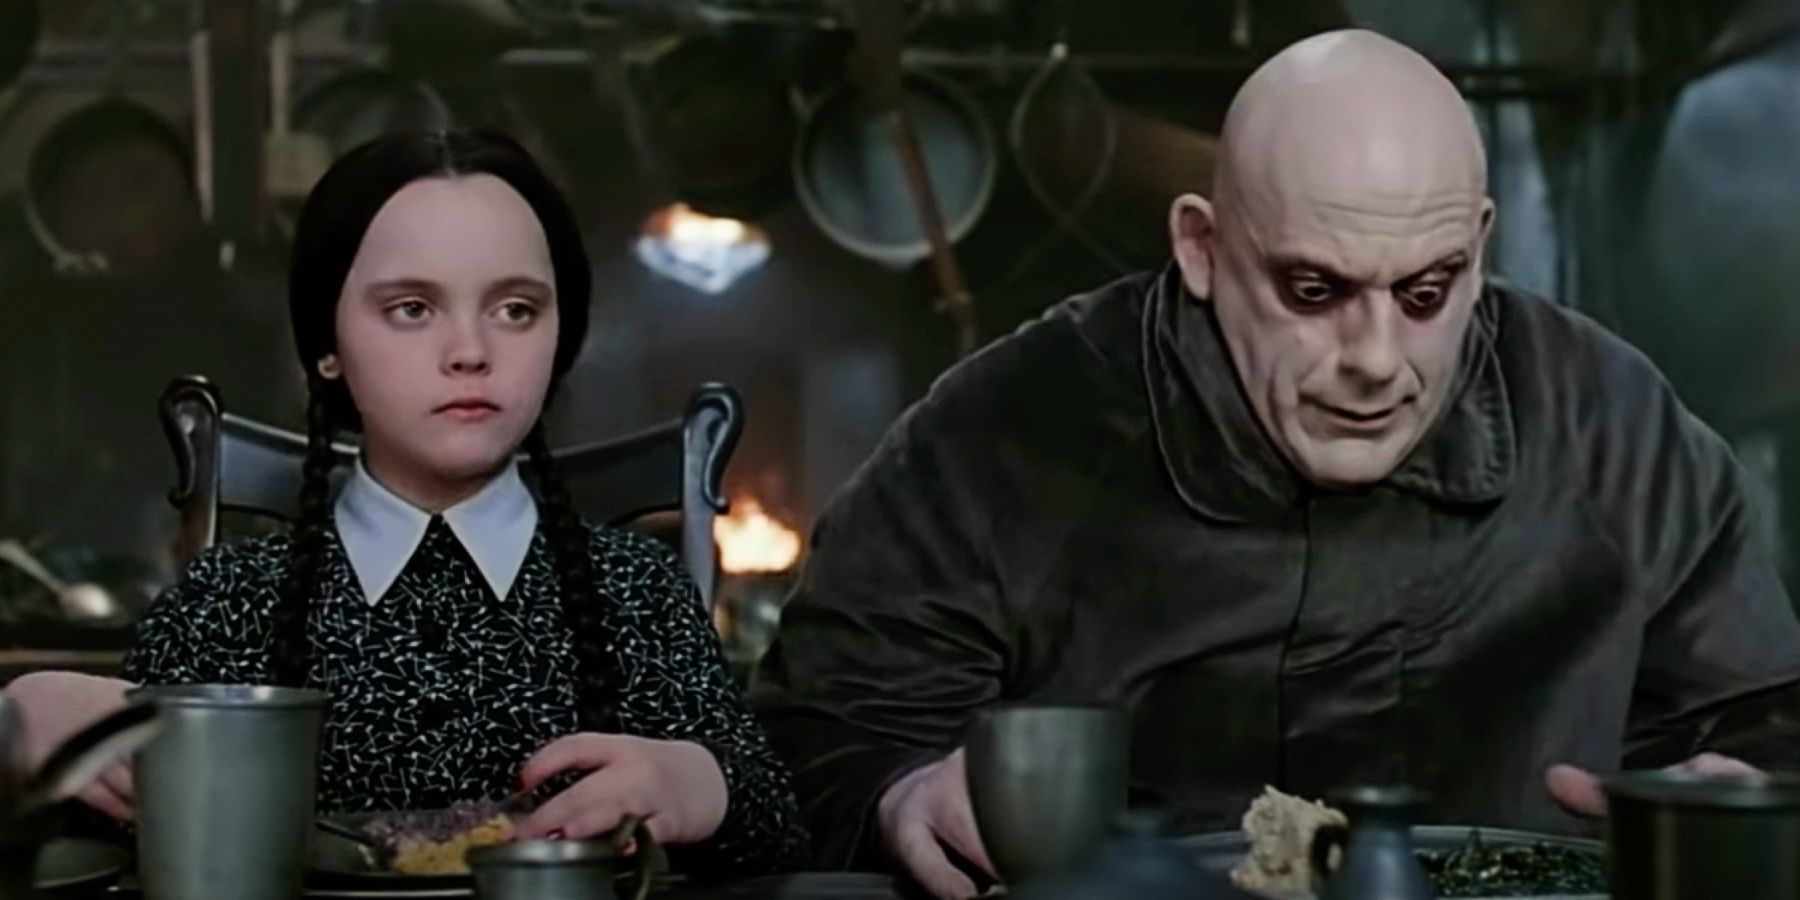 The Addams Family Christina Ricci as Wednesday and Christopher Lloyd as Uncle Fester sitting at a table